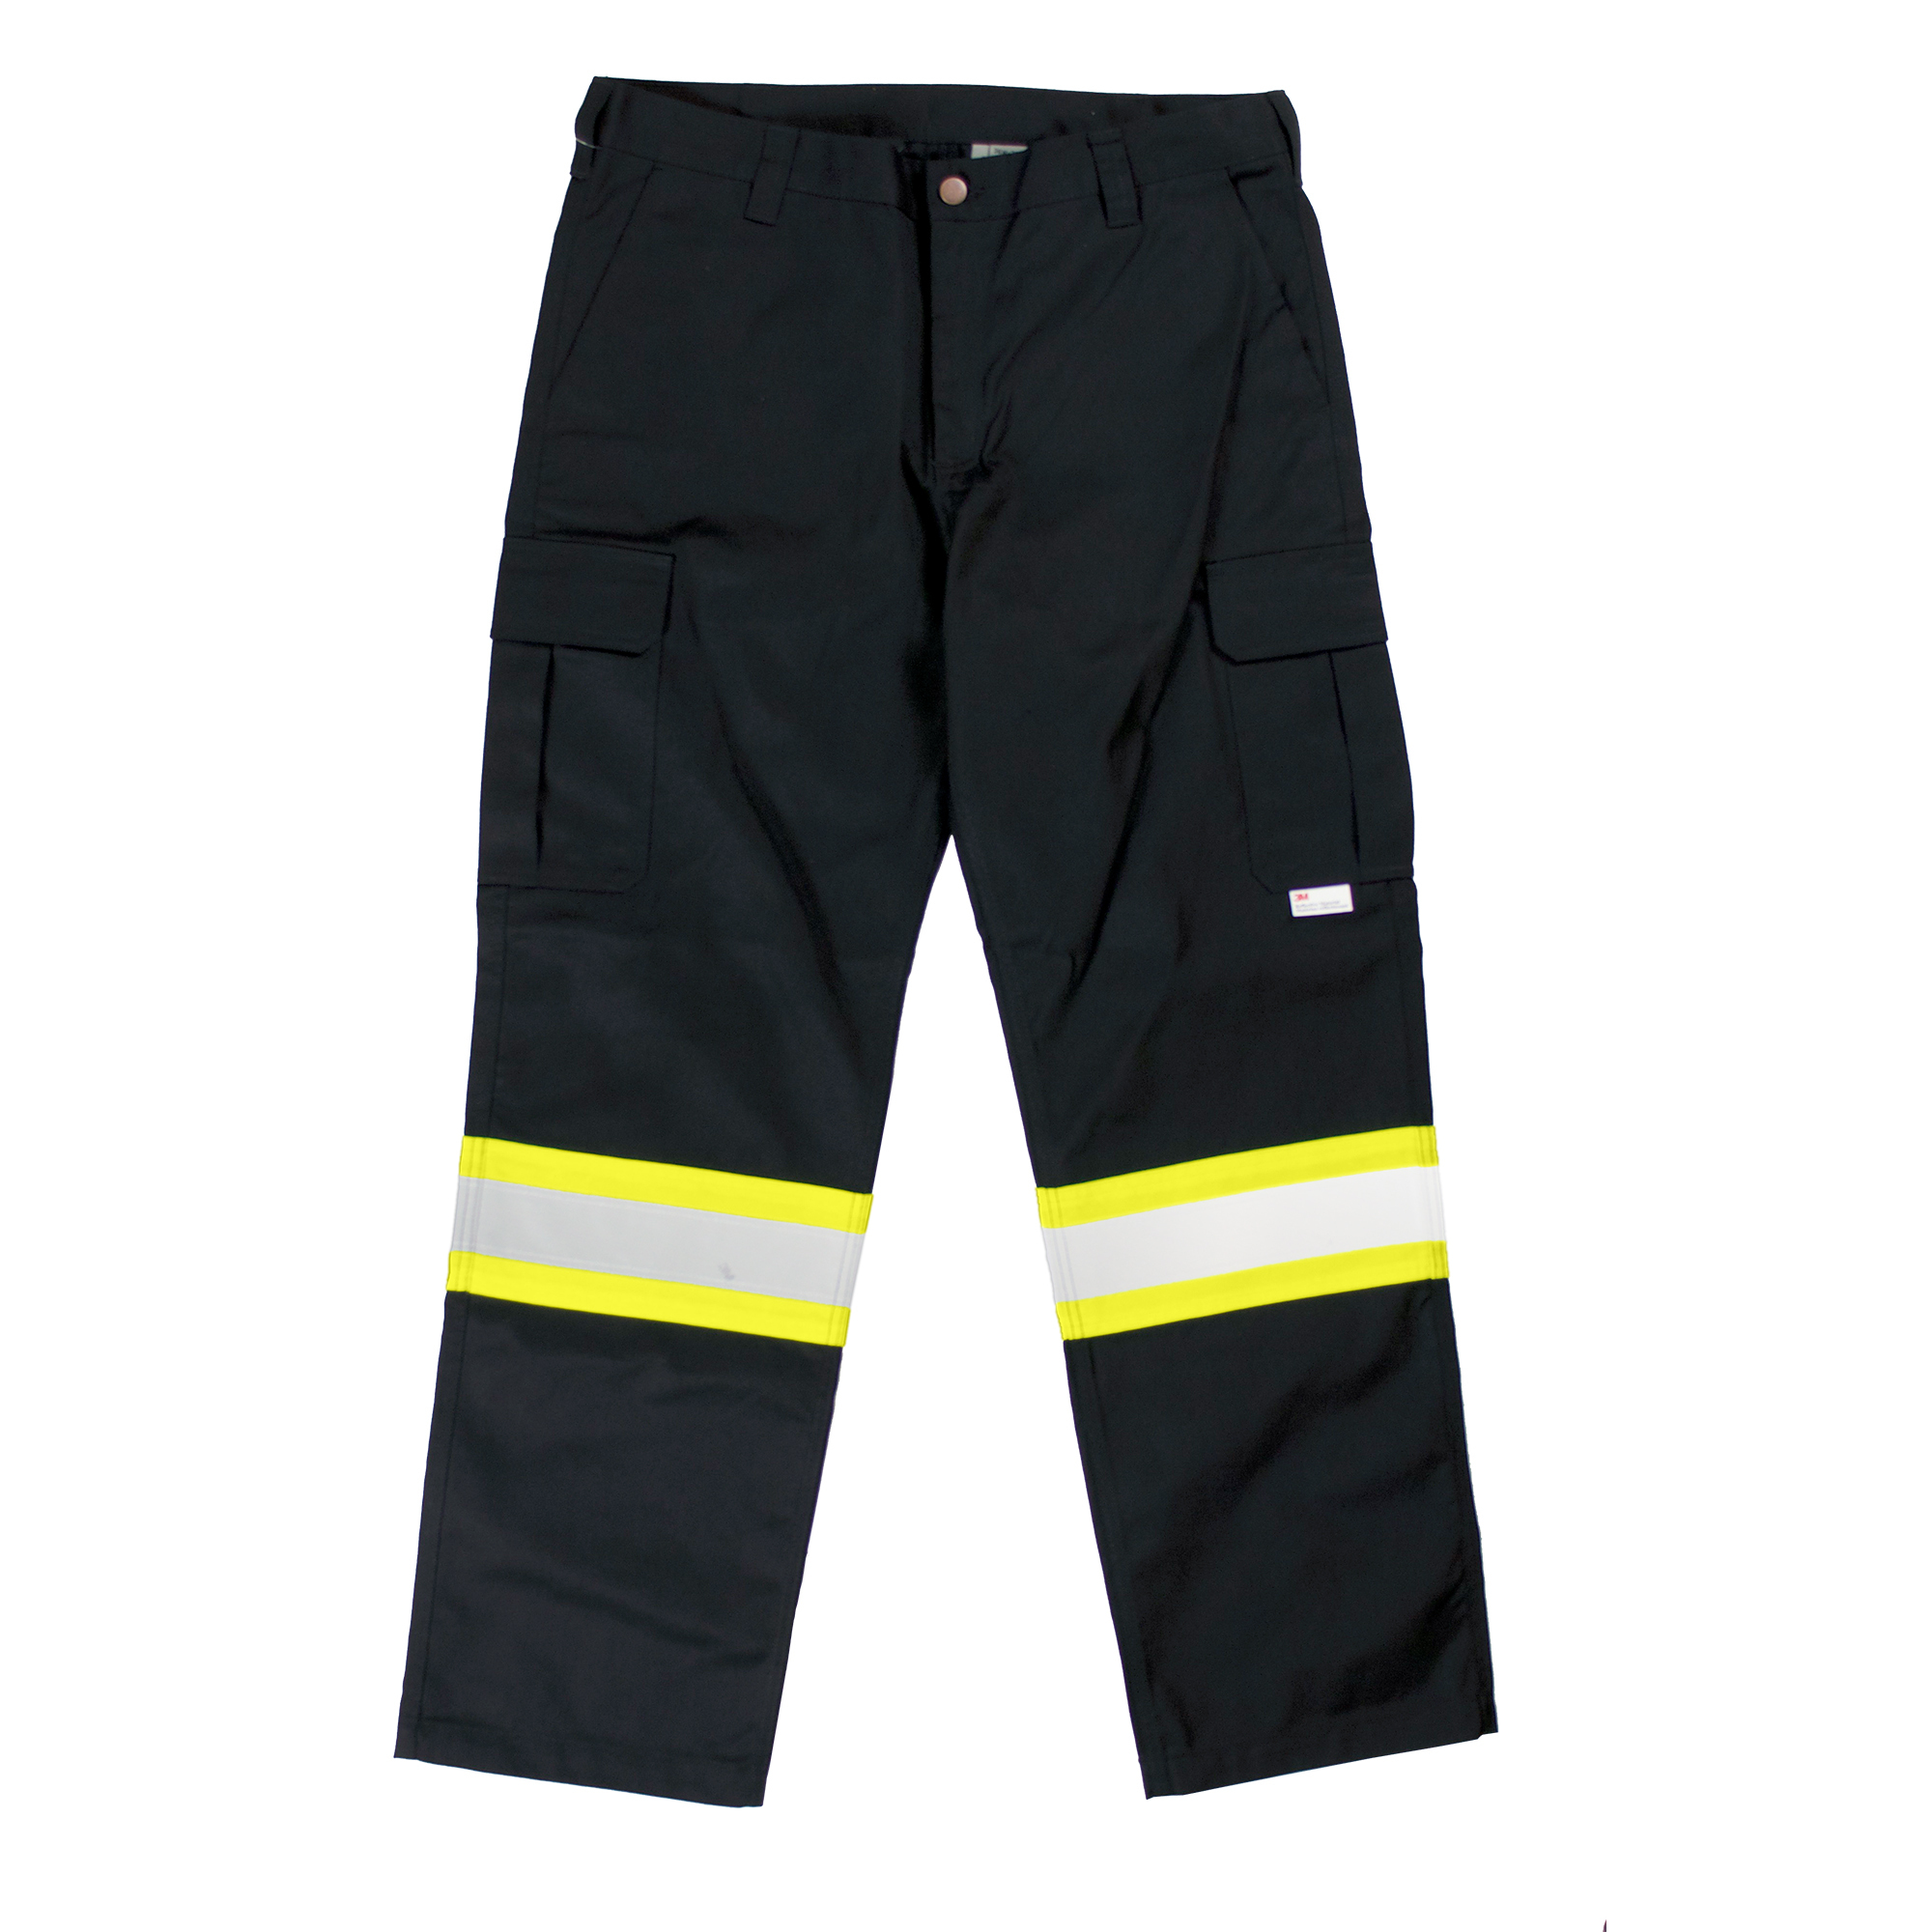 Tough Duck, Safety Cargo Utility Pant, Waist 38 in, Inseam 32 in, Color Black, Model S60711